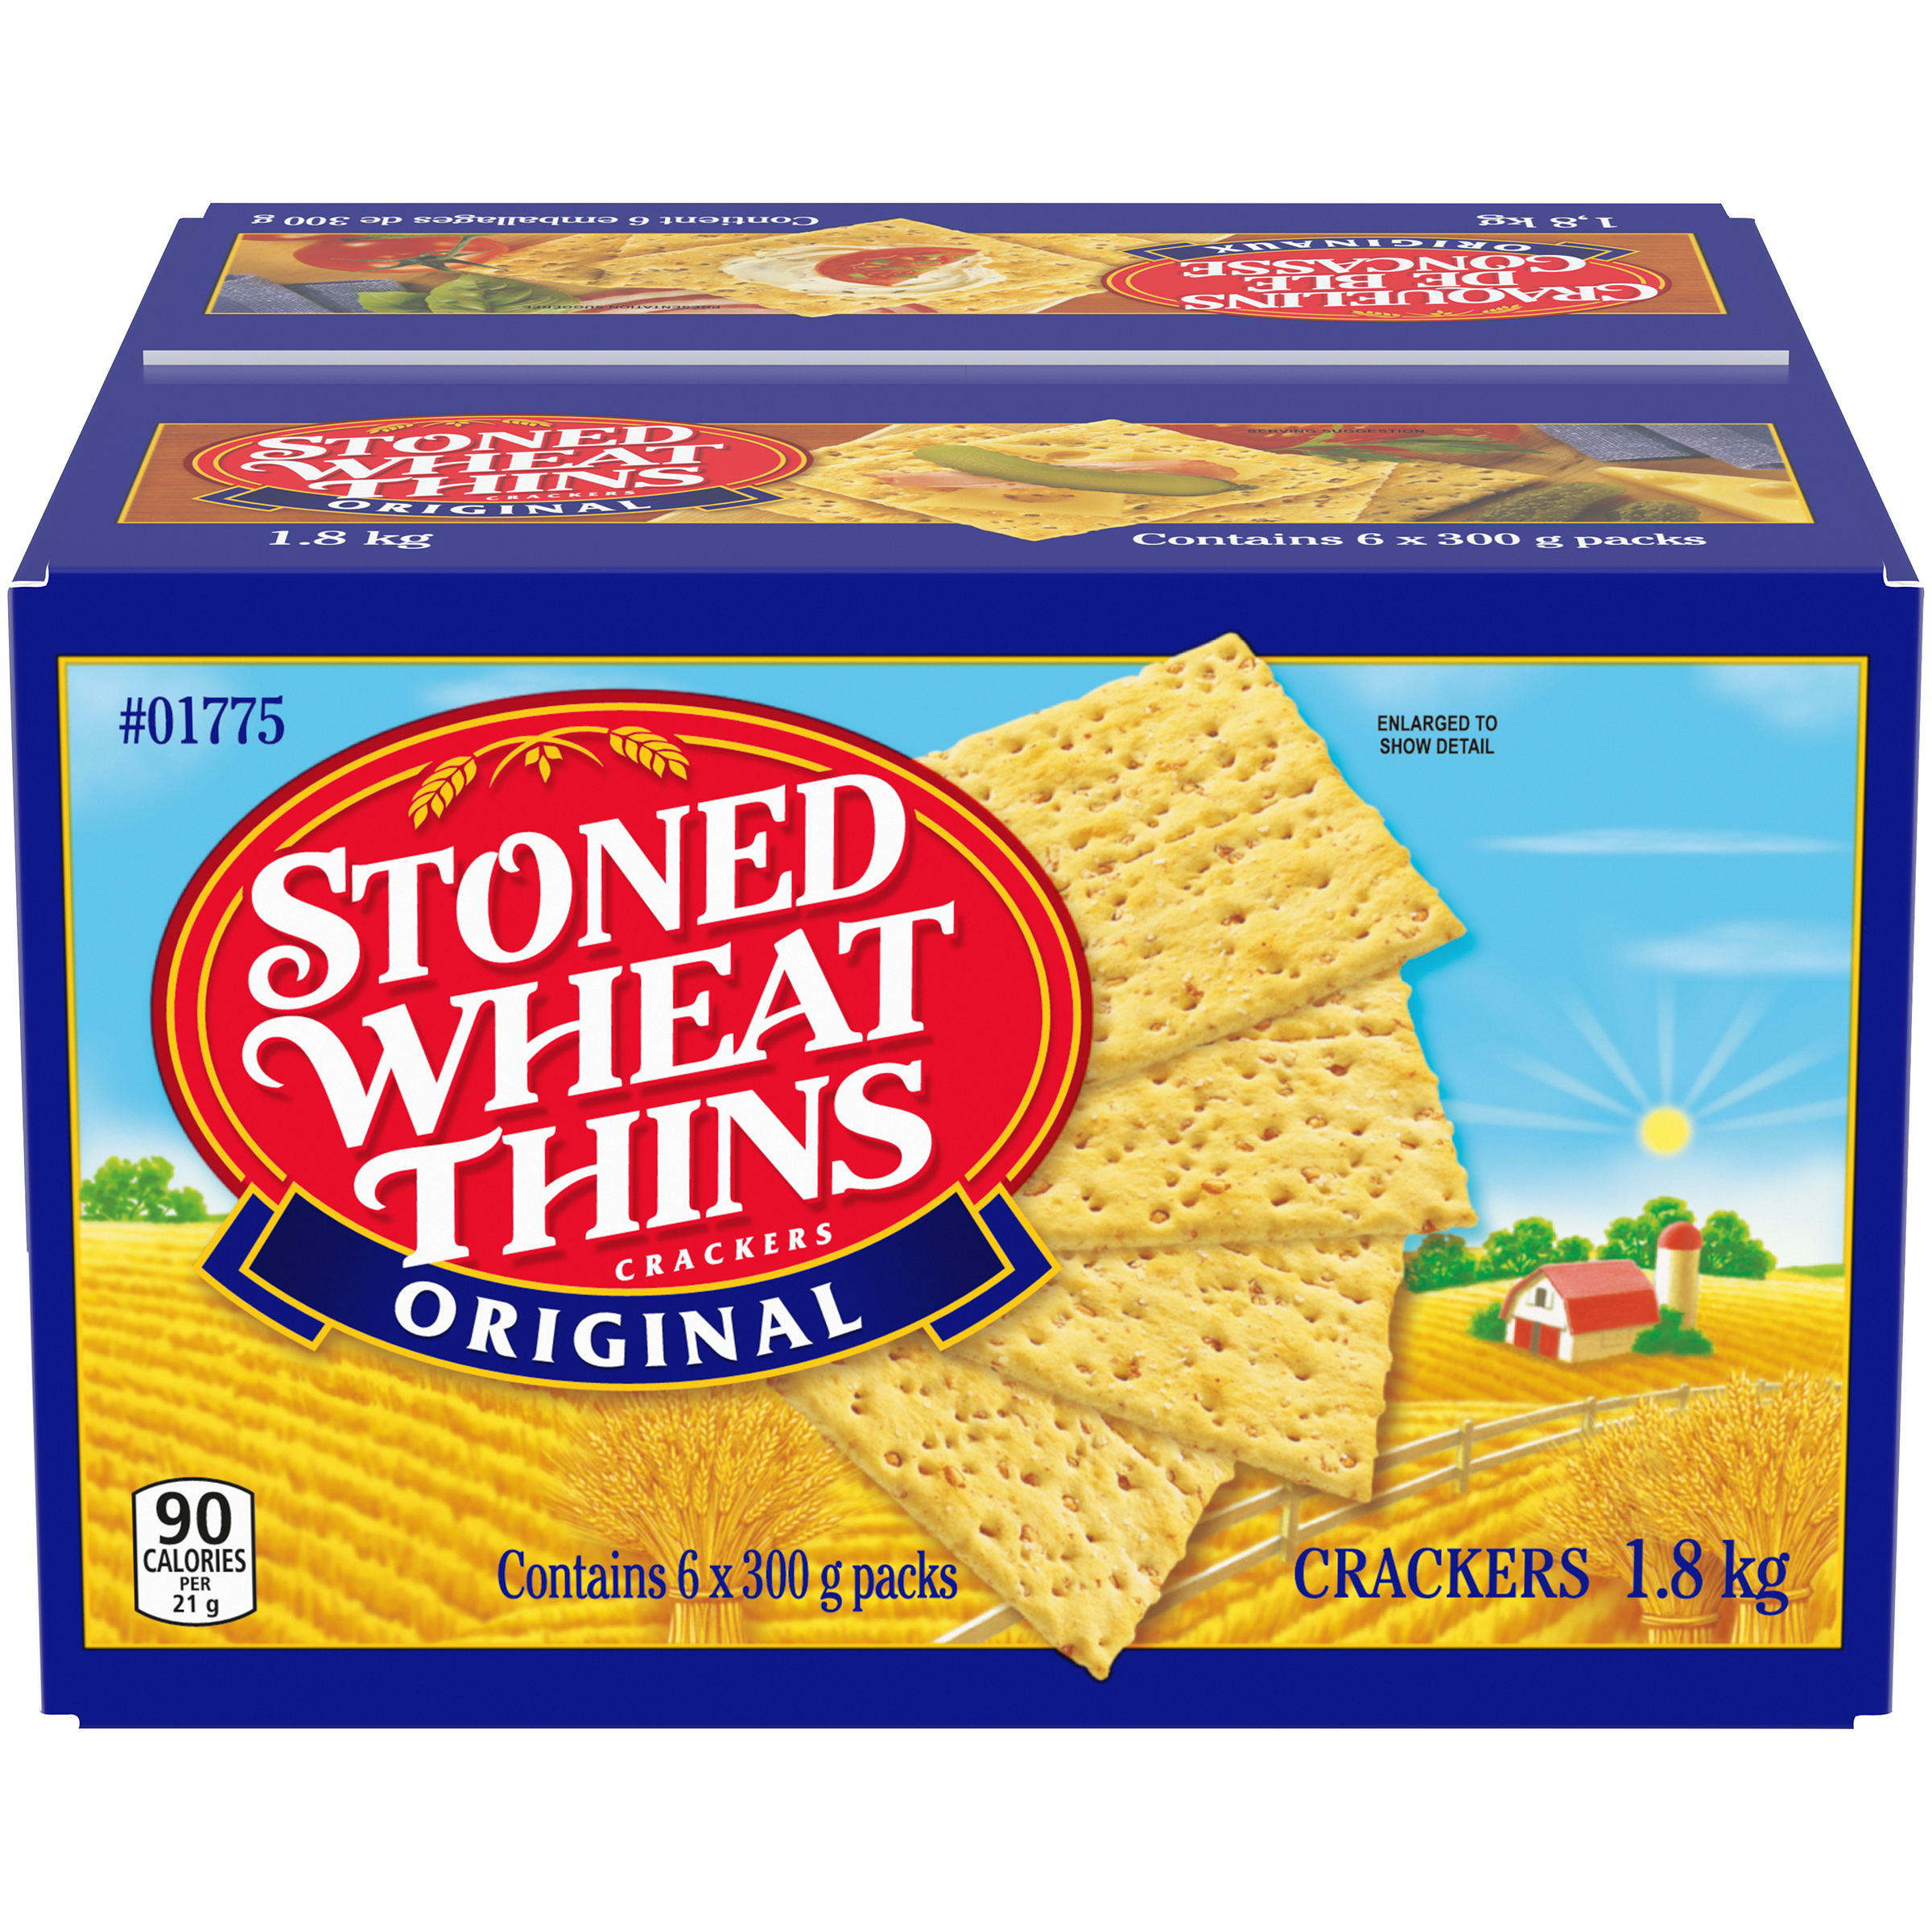 STONED WHEAT THINS Original Crackers, 1.8 kg-0